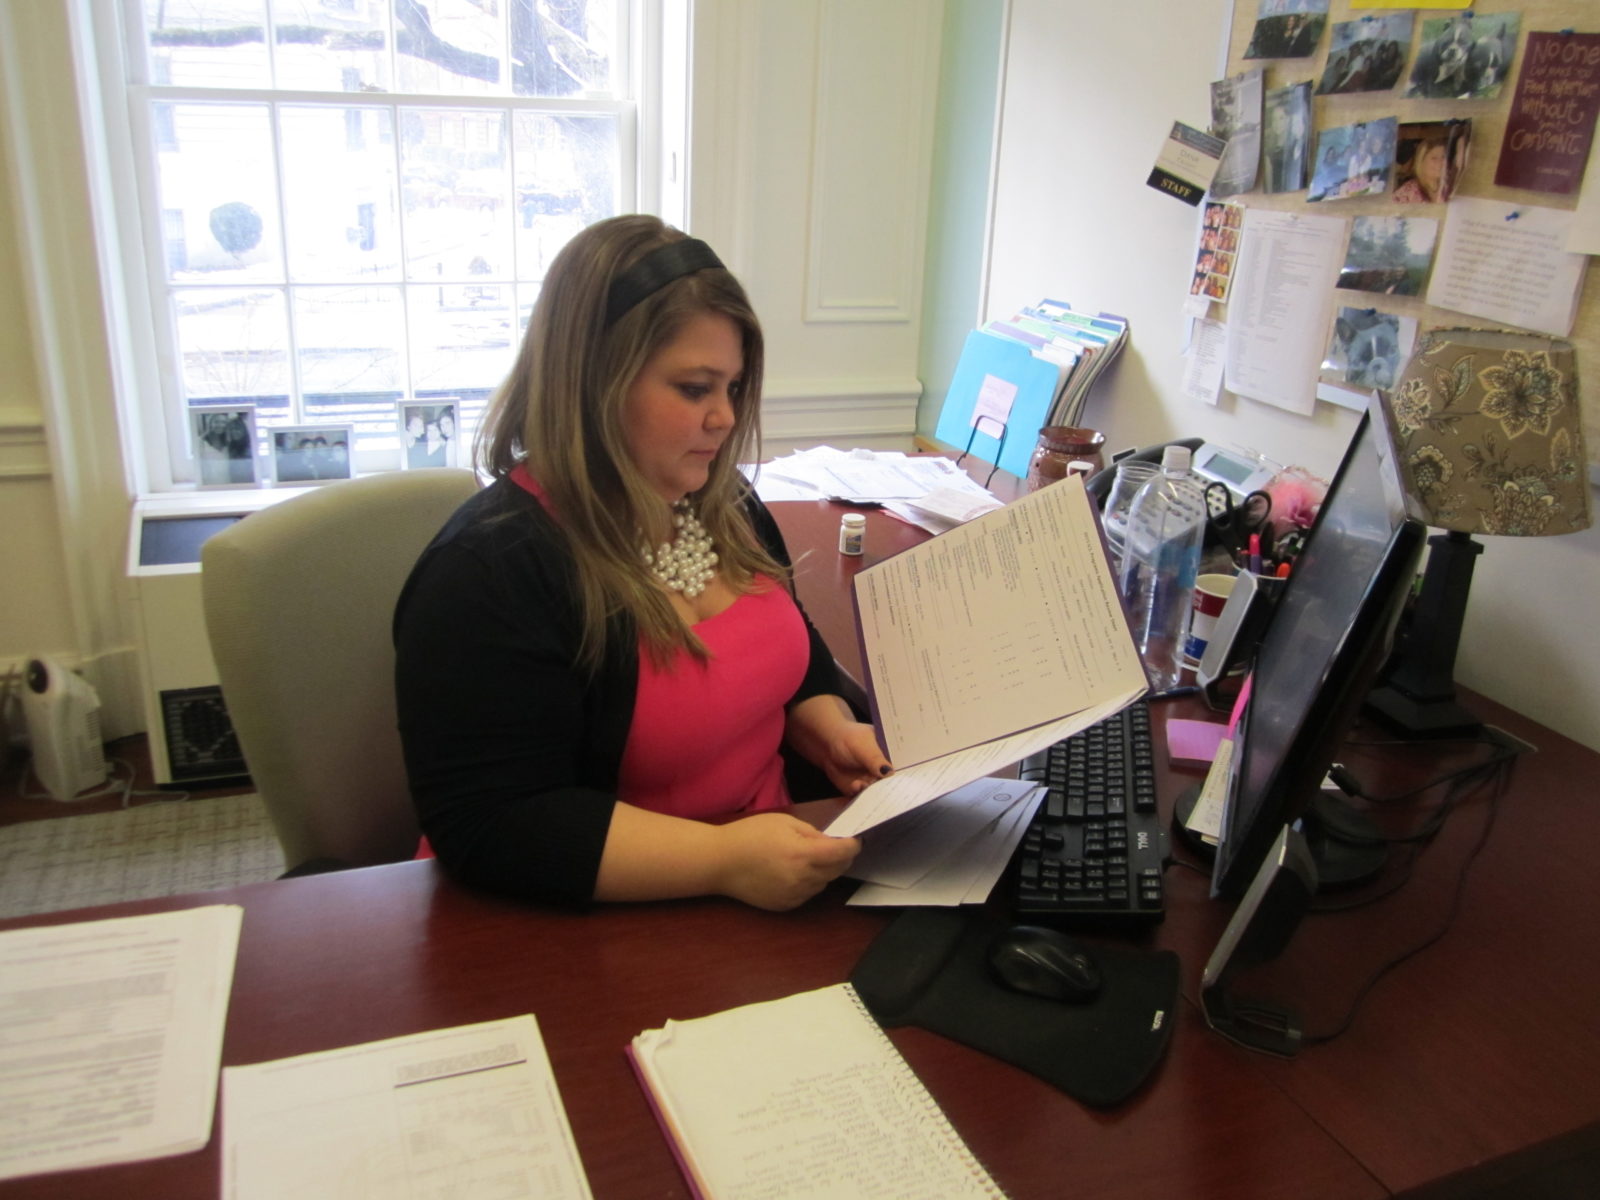 Dana Faught, associate director of U.S. programs recruitment and admissions, reviews an application for the Capital Semester Fall 2015 program.